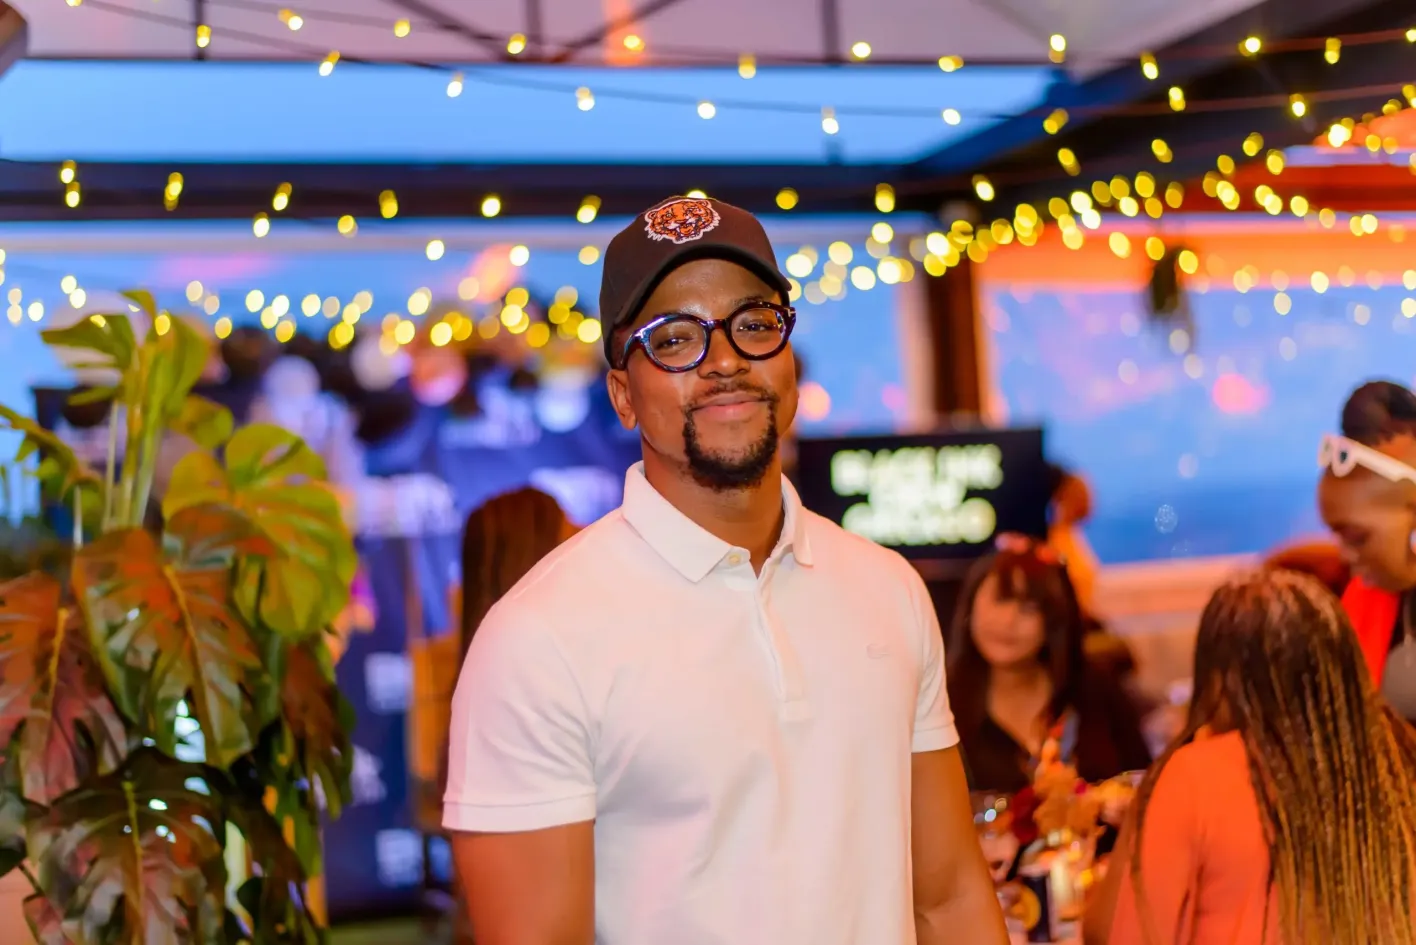 Maps Maponyane’s burger joint closes its doors